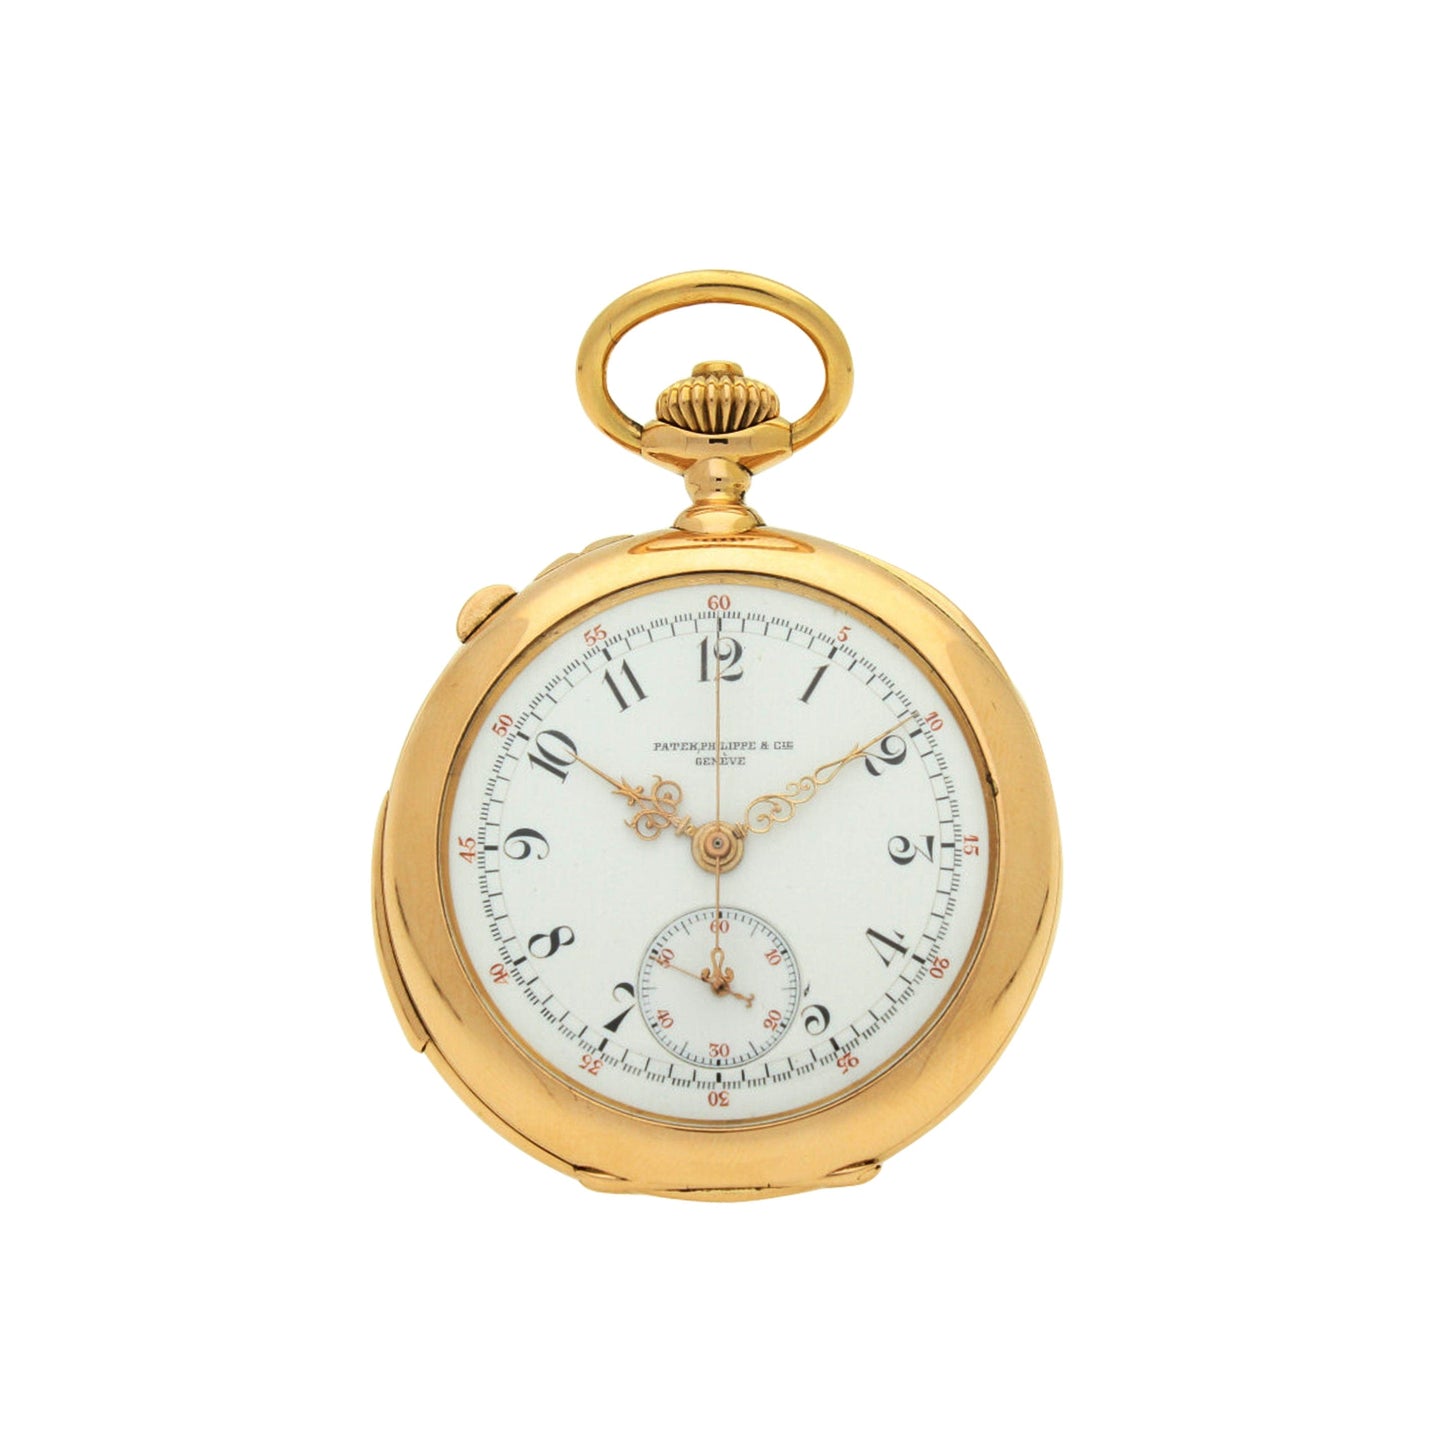 18ct rose gold Patek Philippe open face minute repeating chronograph pocket watch. Made 1900